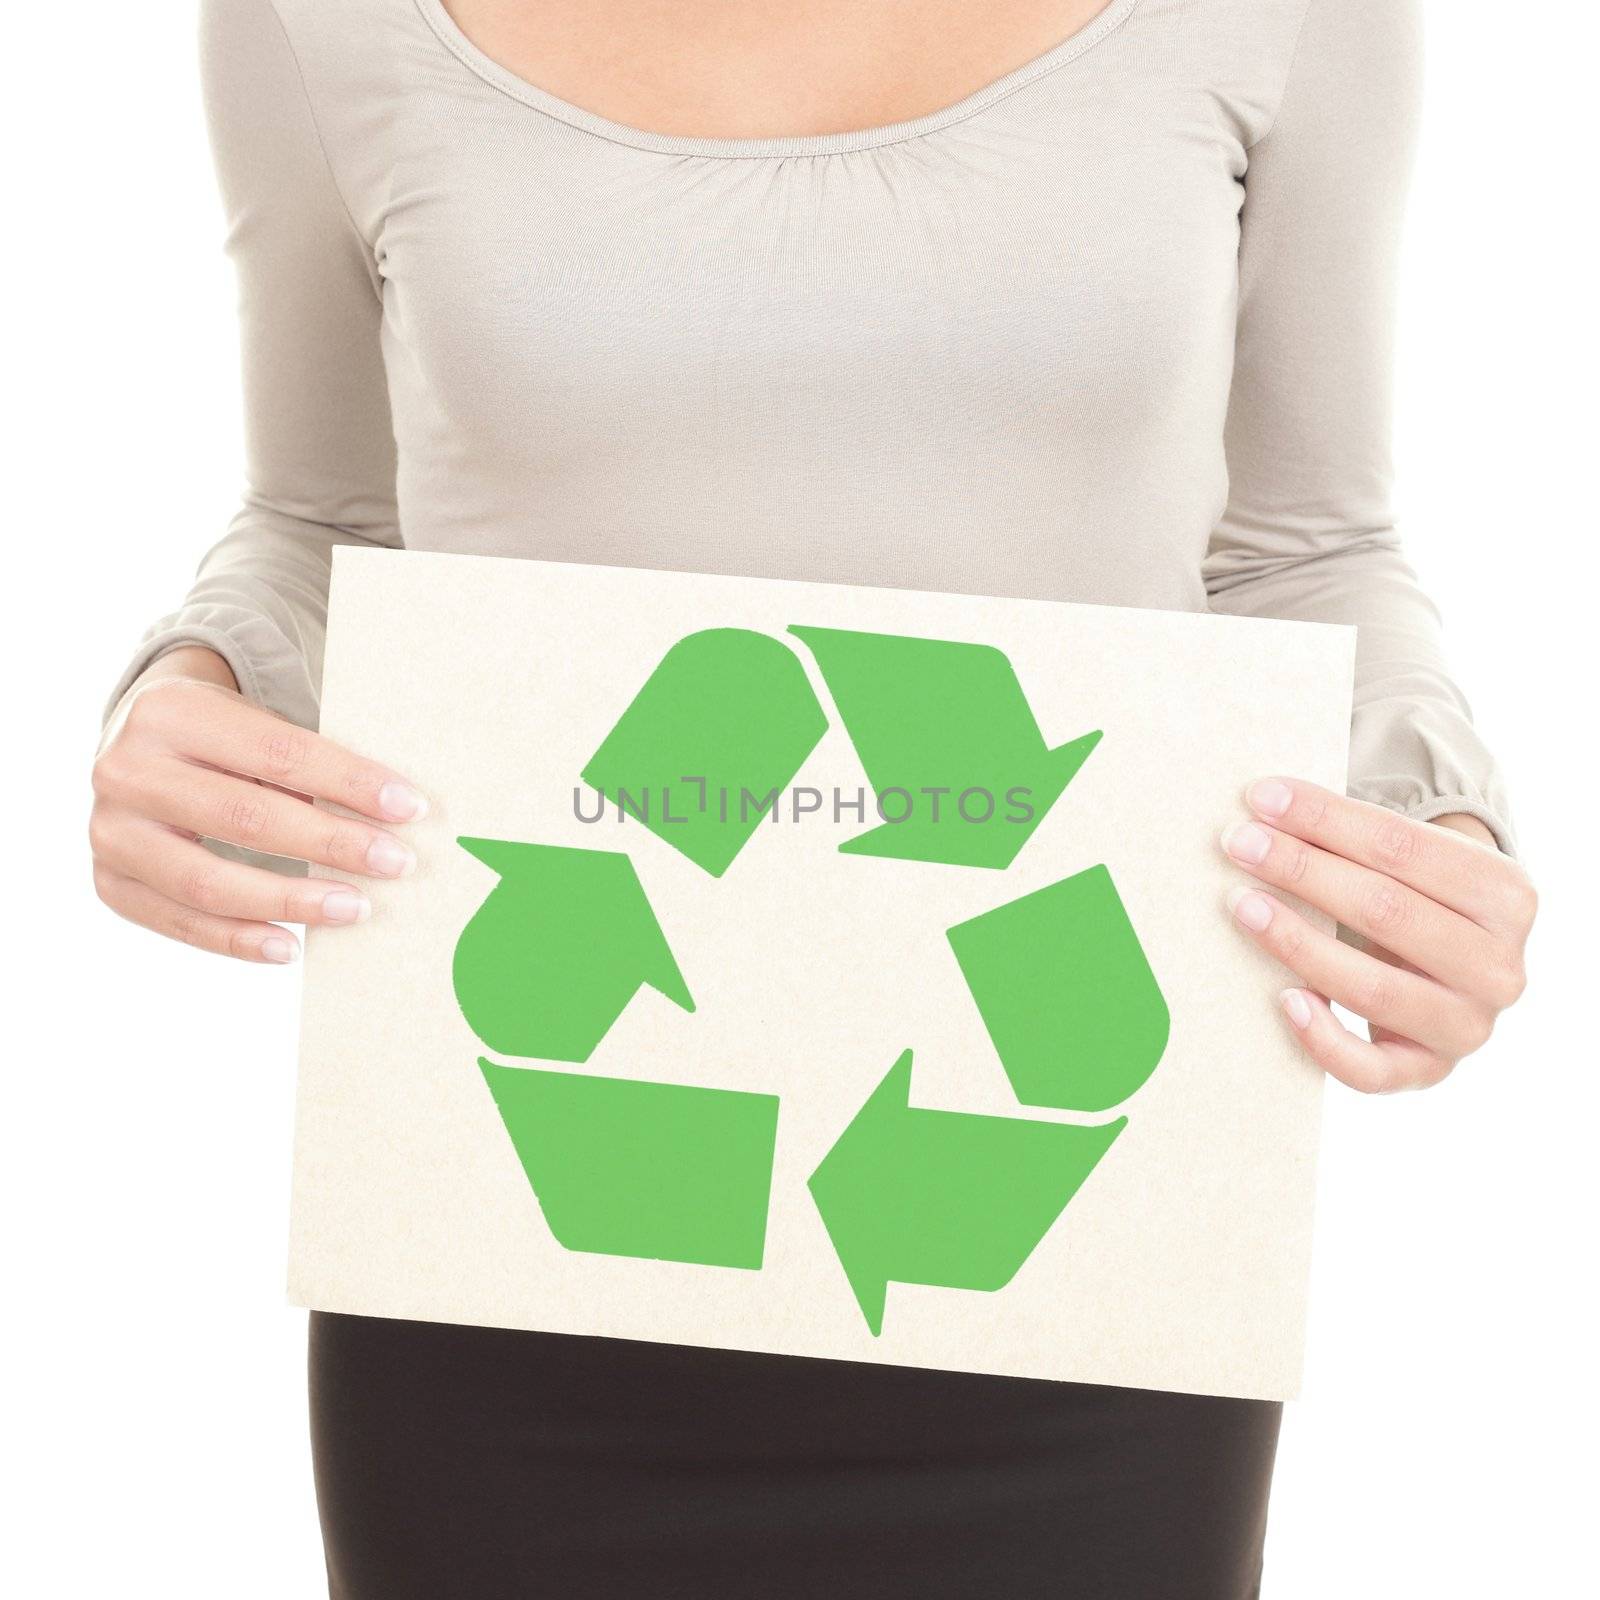 Recycling woman showing the recycle sign / symbol on recycled paper. Isolated on white background.